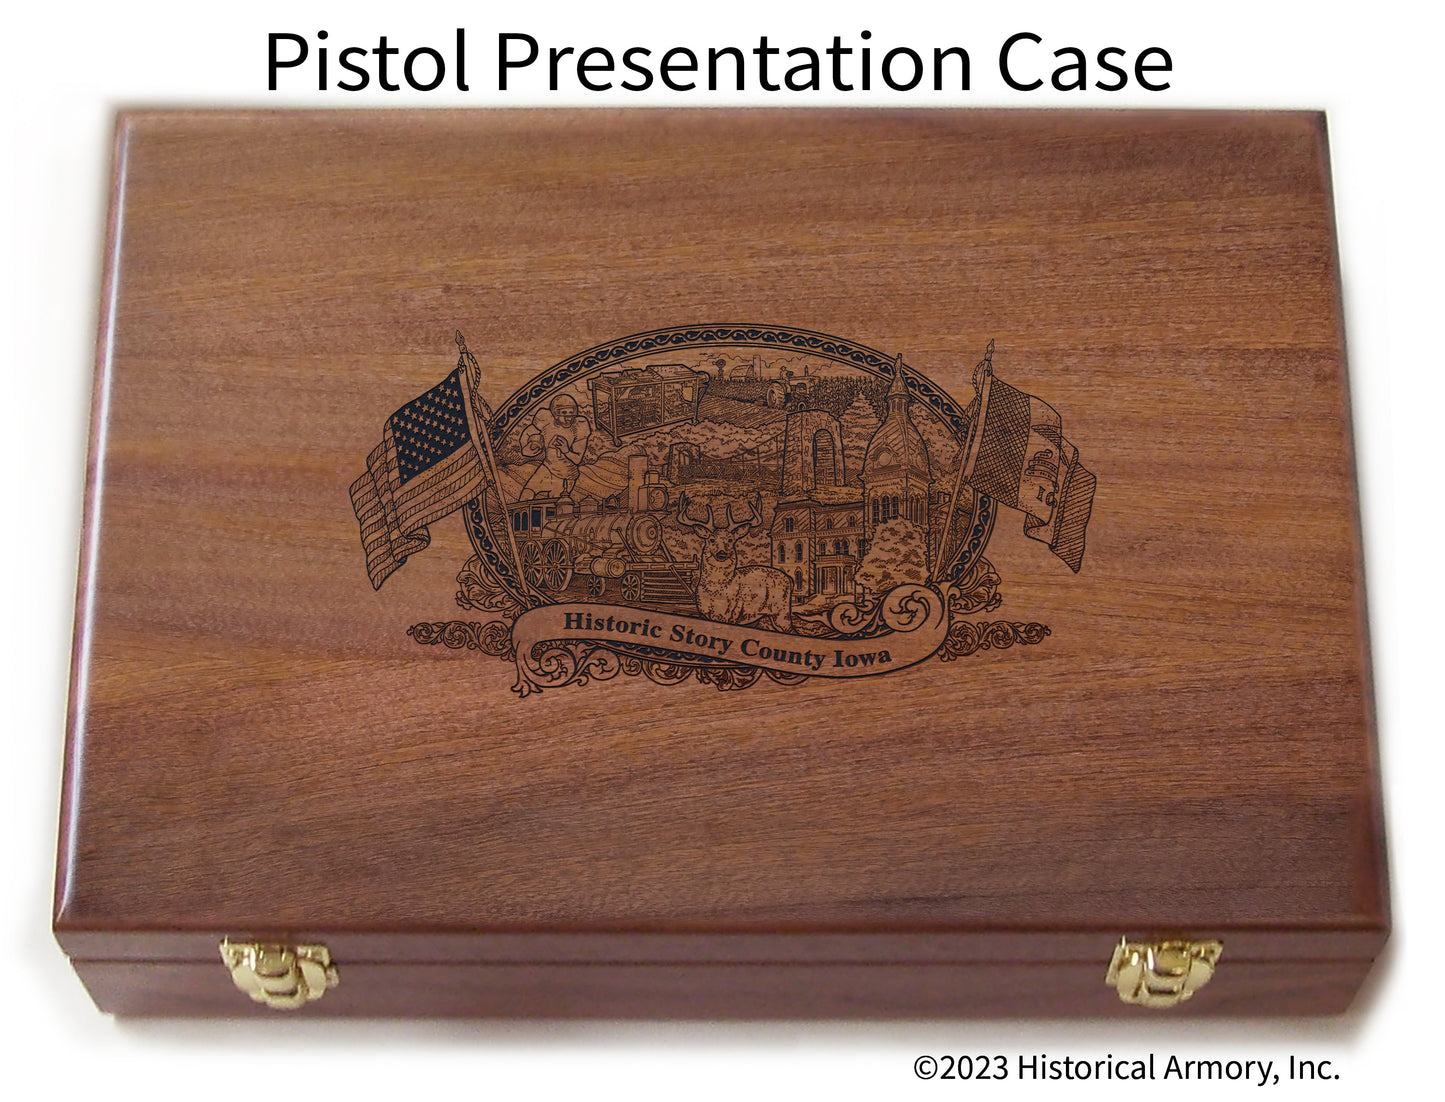 Story County Iowa Engraved .45 Auto Ruger 1911 Presentation Case